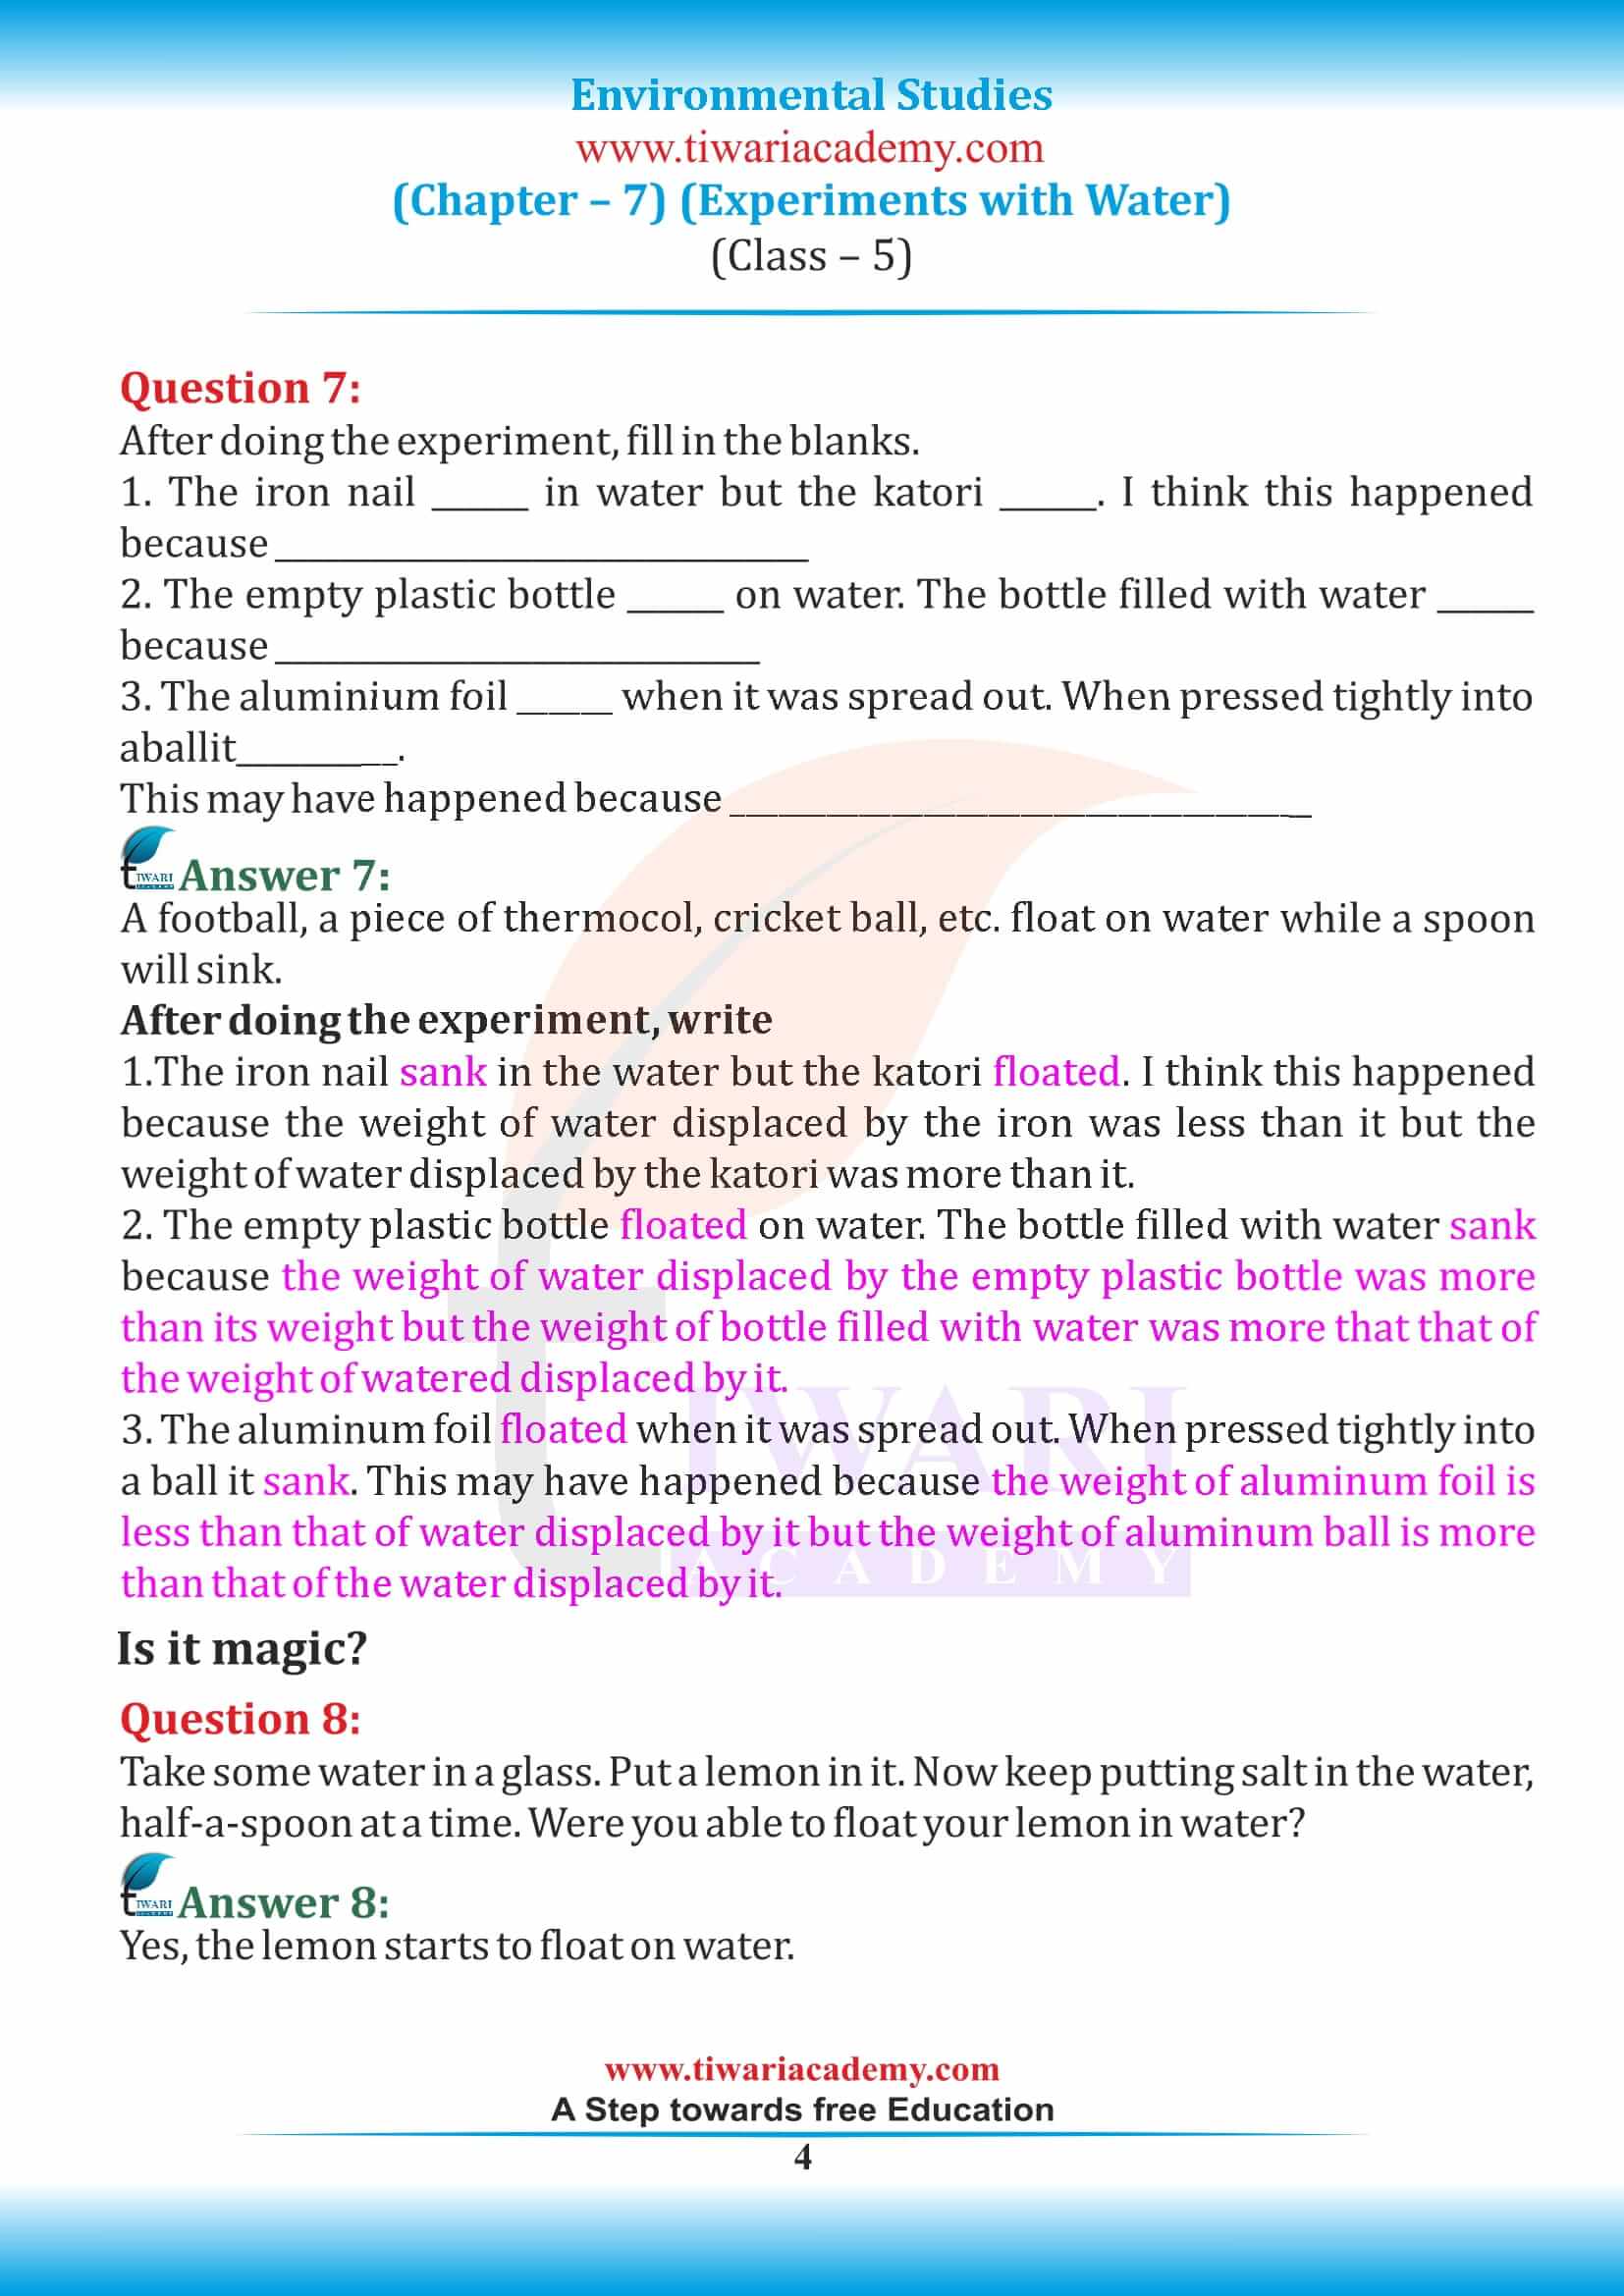 NCERT Solutions for Class 5 EVS Chapter 7 in English Medium